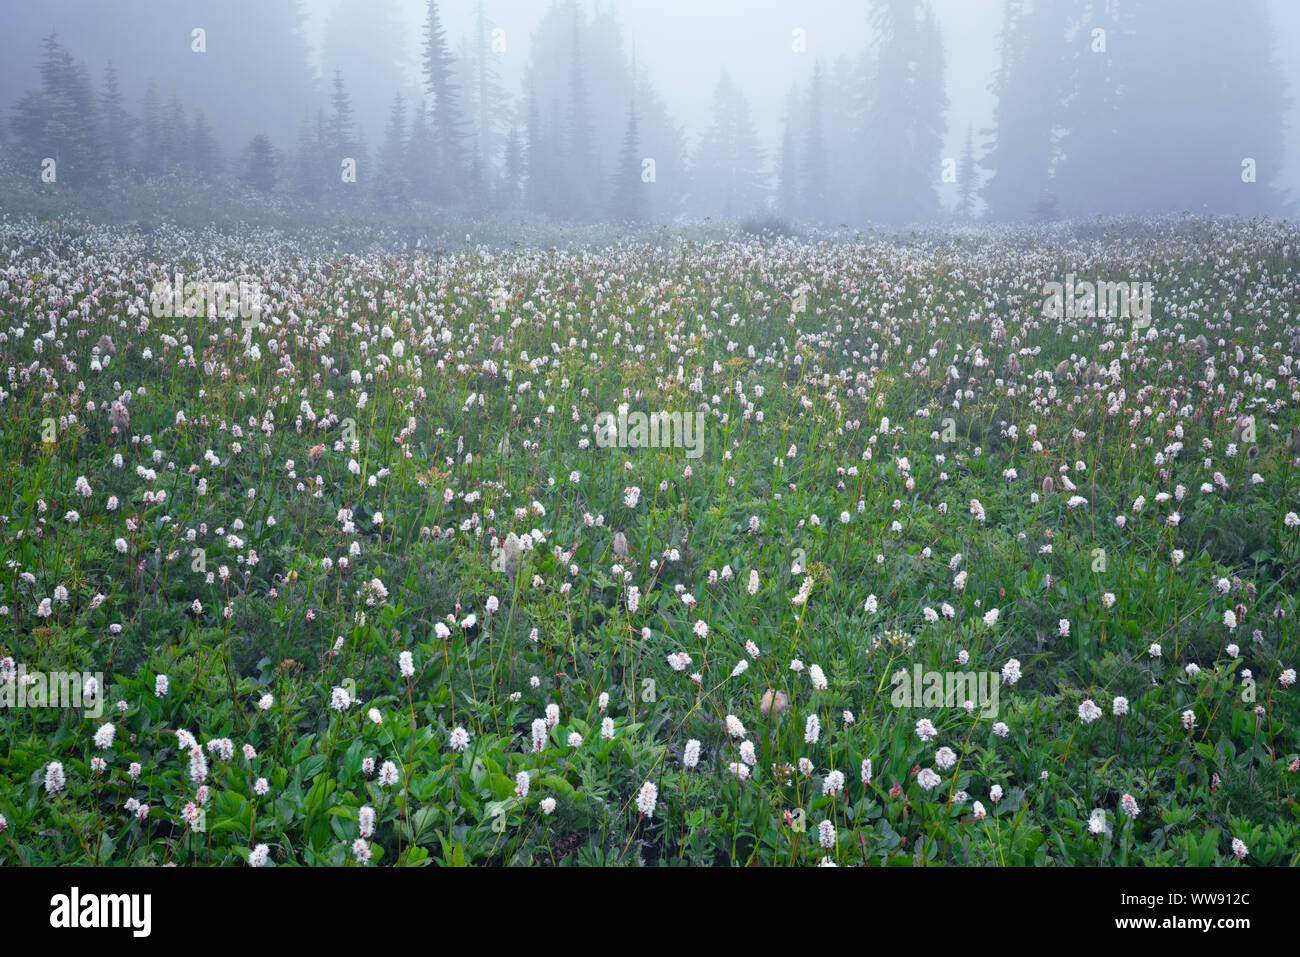 The soft cottony bloom of bistort gives a snowy appearance among the fog in the Paradise Meadow of Washington’s Mt Rainier National Park. Stock Photo